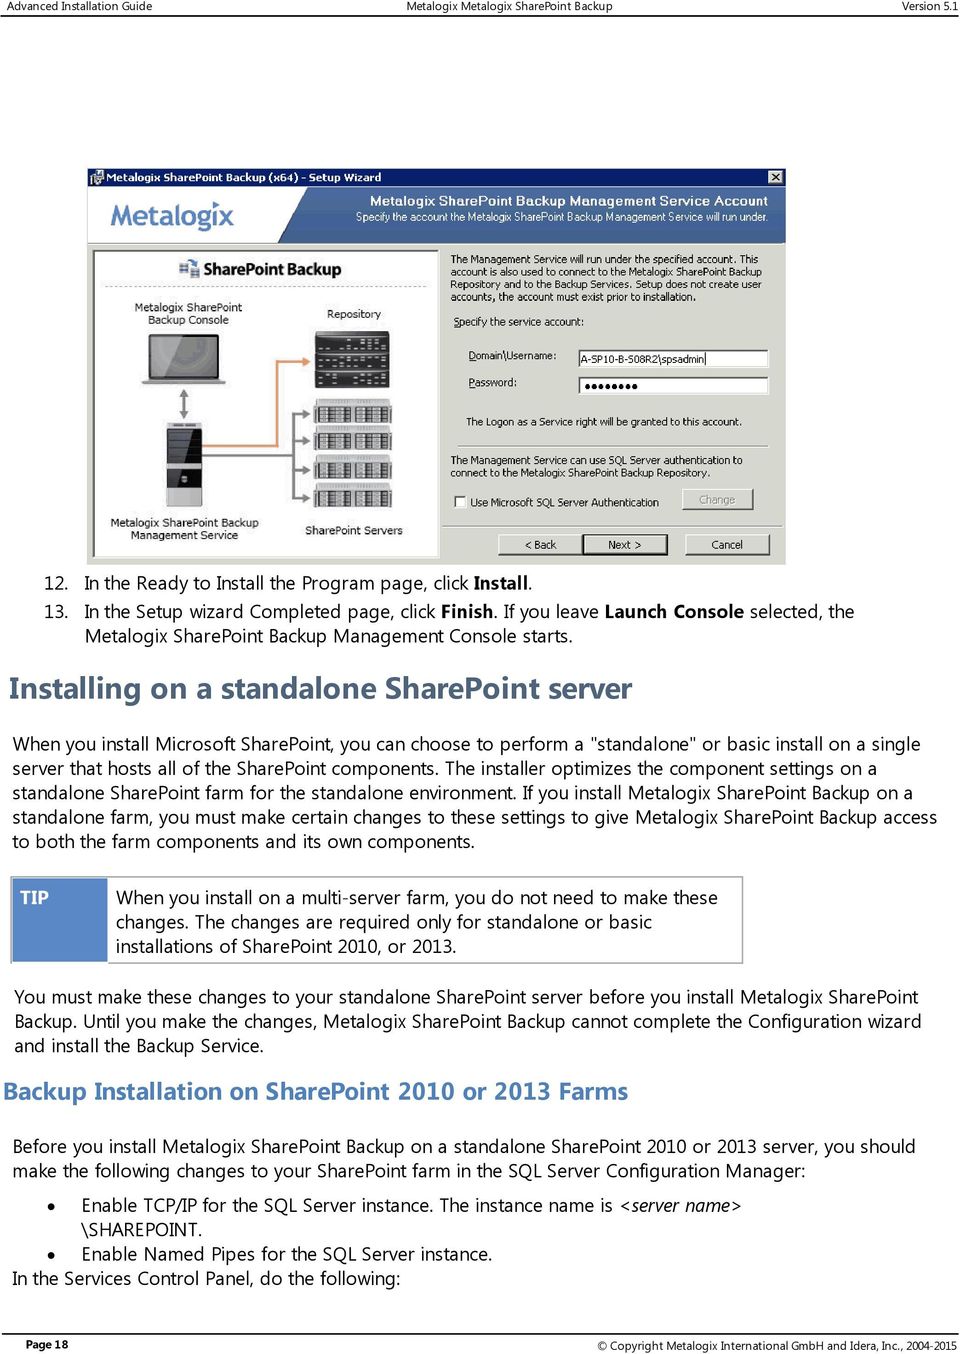 Installing on a standalone SharePoint server When you install Microsoft SharePoint, you can choose to perform a "standalone" or basic install on a single server that hosts all of the SharePoint